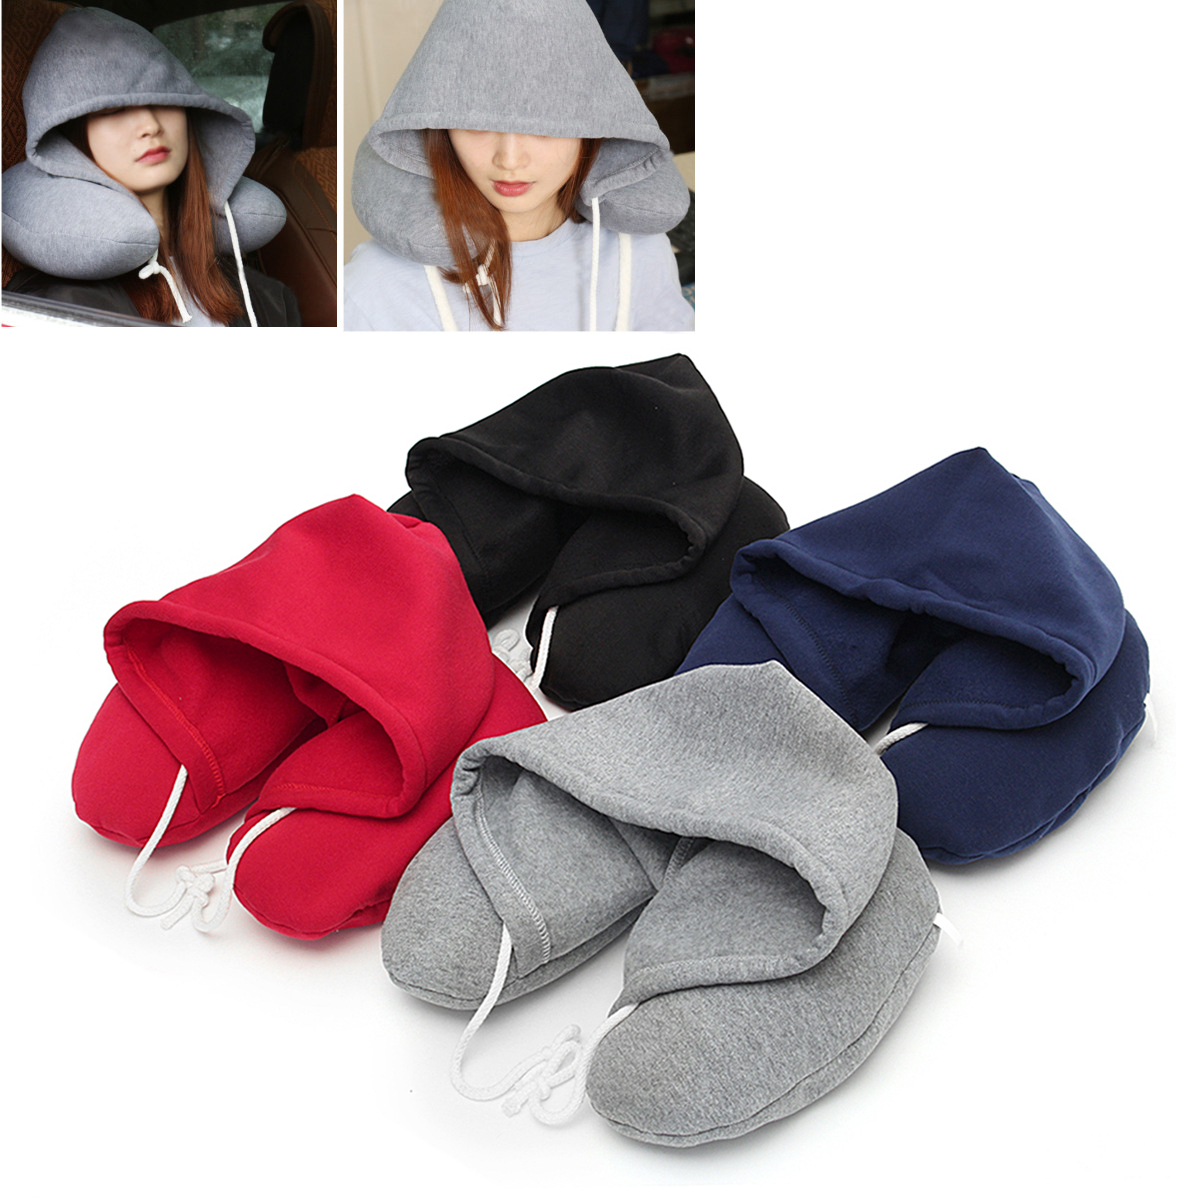 U-Shaped-Hooded-Pillow-Cushion-Winter-Warm-Hat-Rest-Neck-Support-Winter-Warm-1243401-2